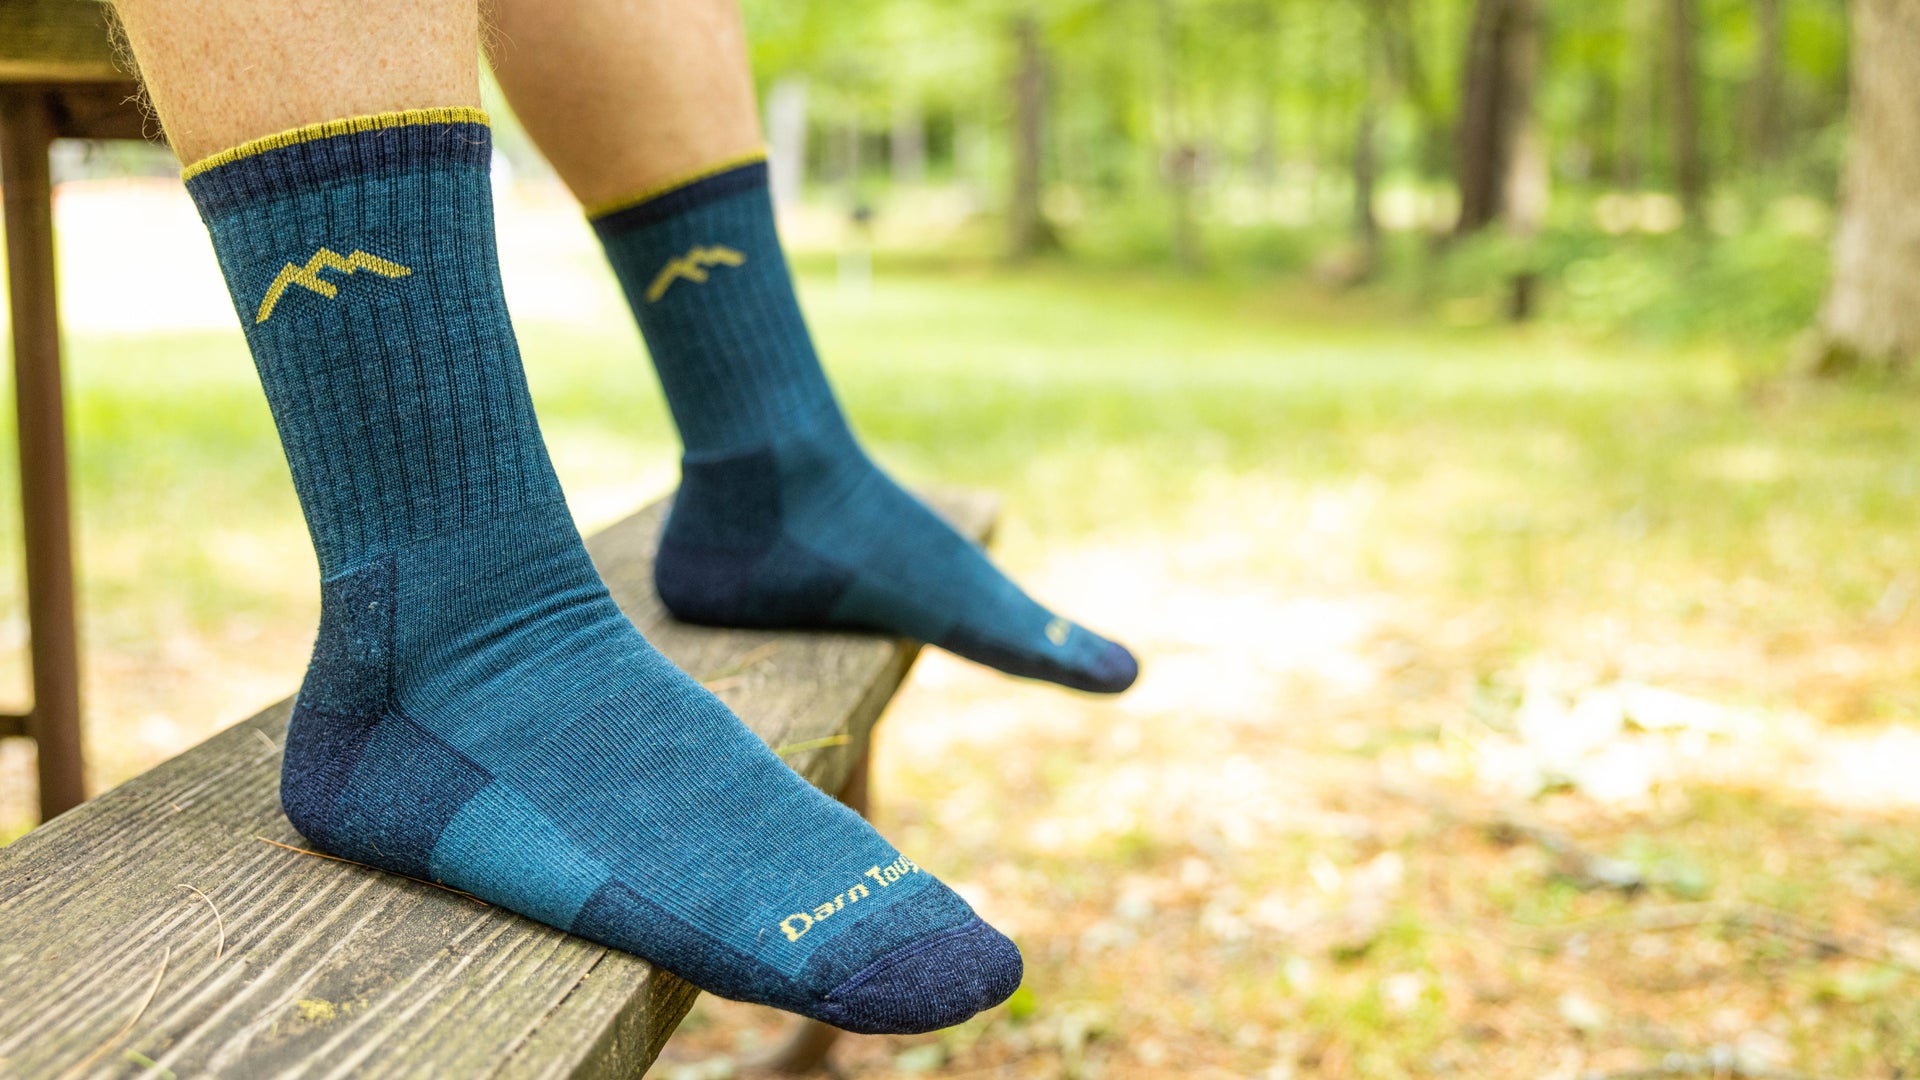 Model resting feet on bench wearing the 1466 in Dark teal 